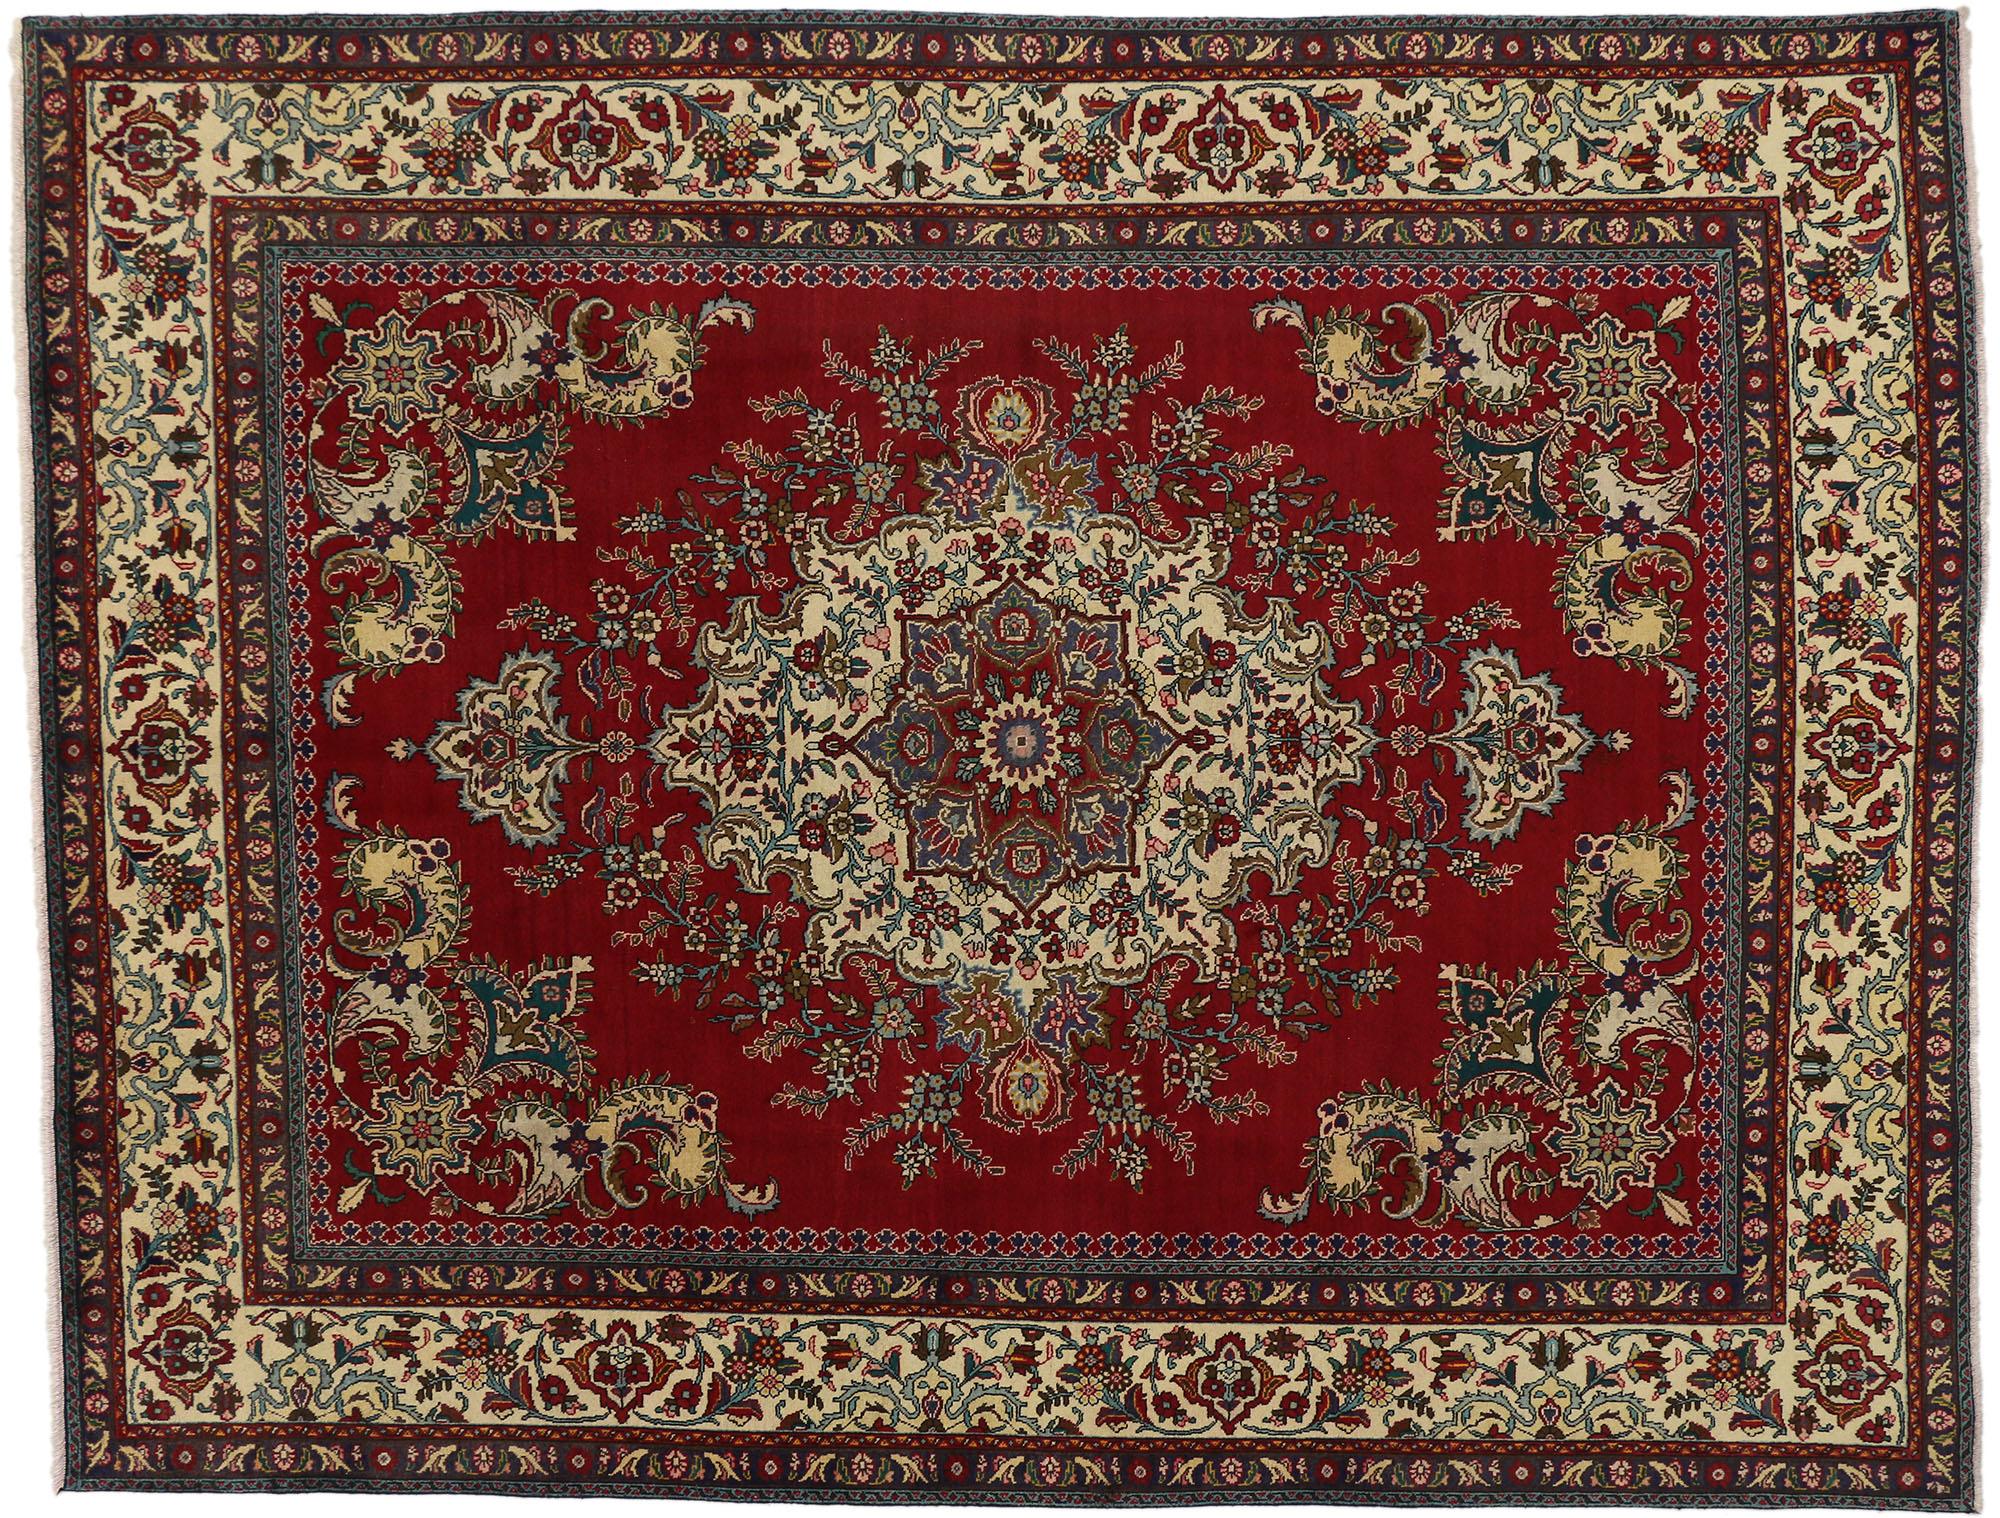 Vintage Persian Tabriz Area Rug with Traditional Colonial and Federal Style In Good Condition For Sale In Dallas, TX